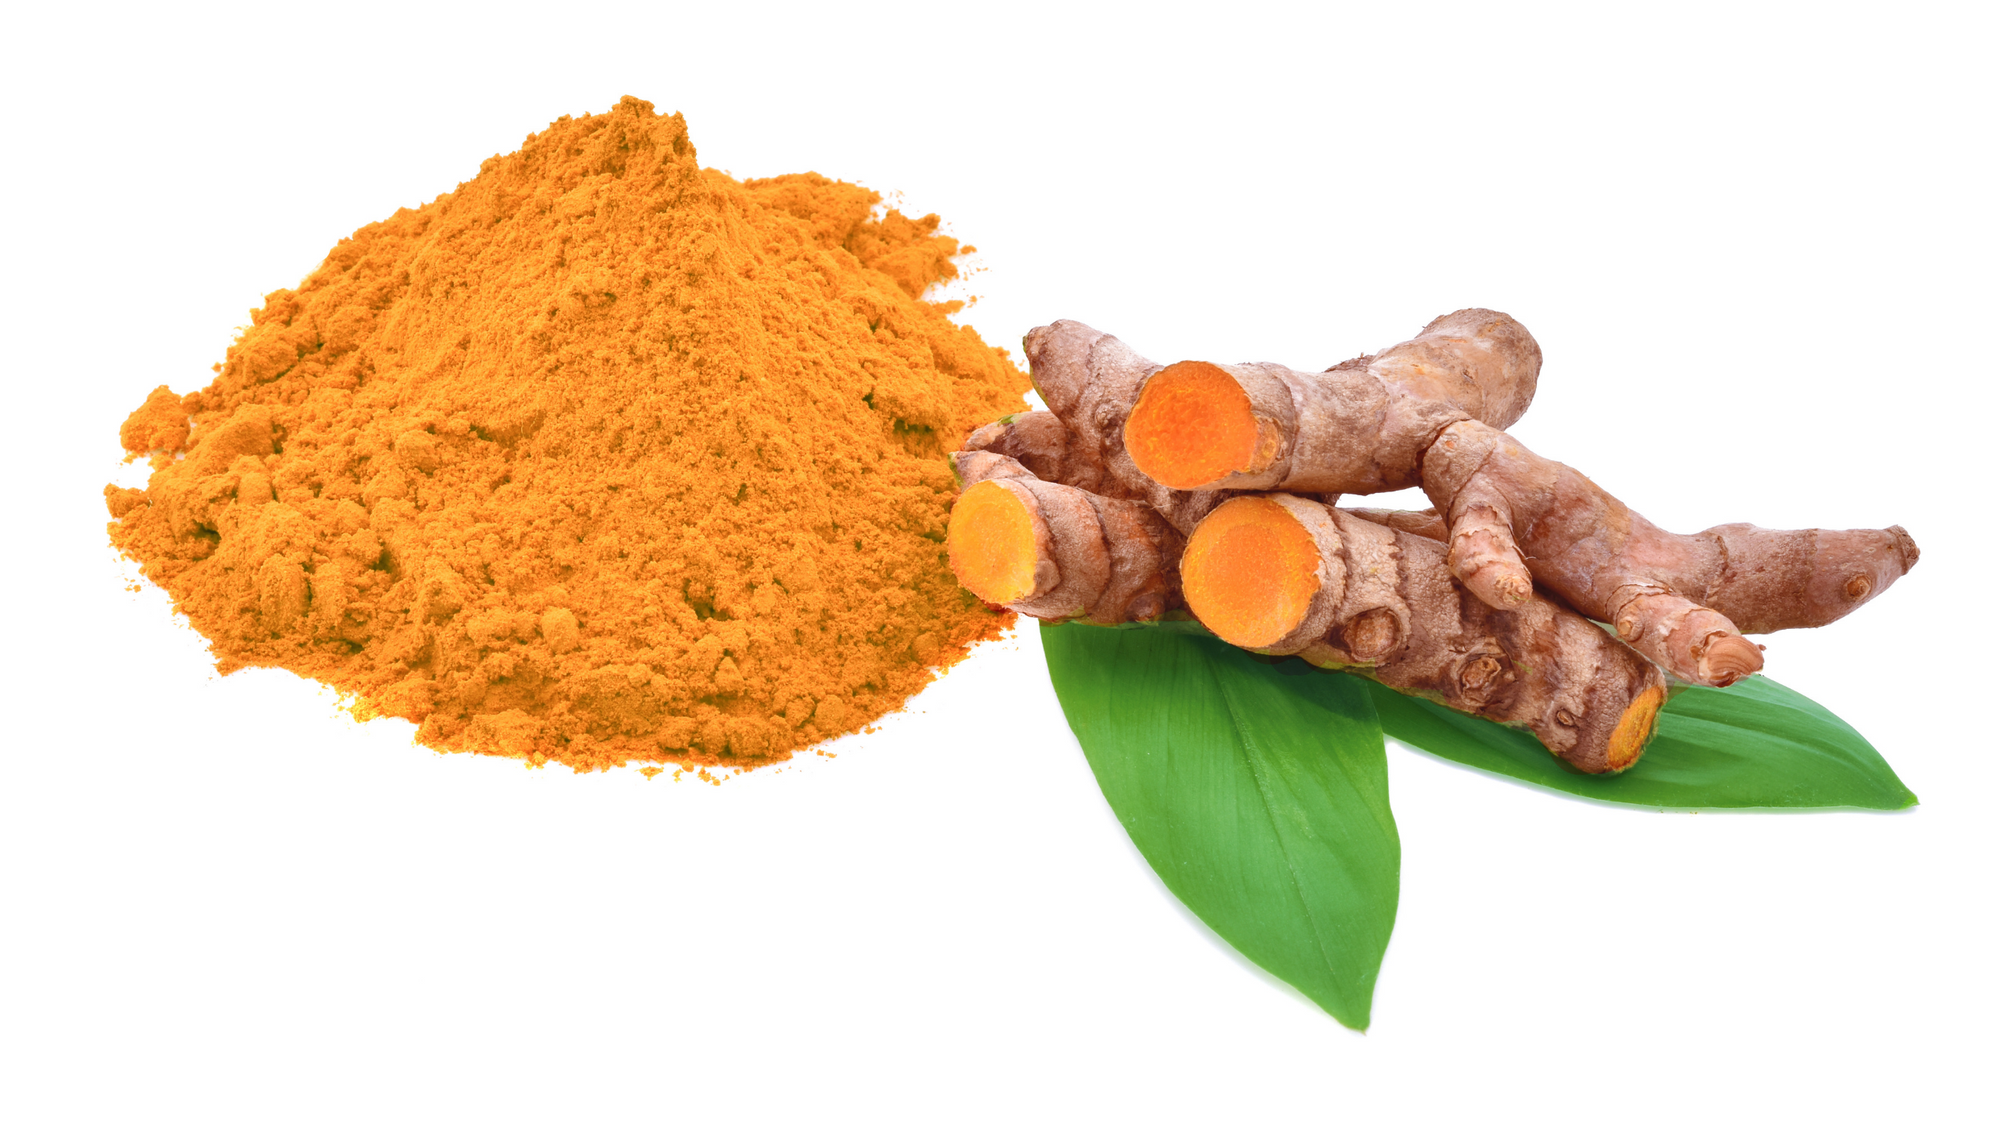 Are Curcumin and Turmeric the Same Thing?